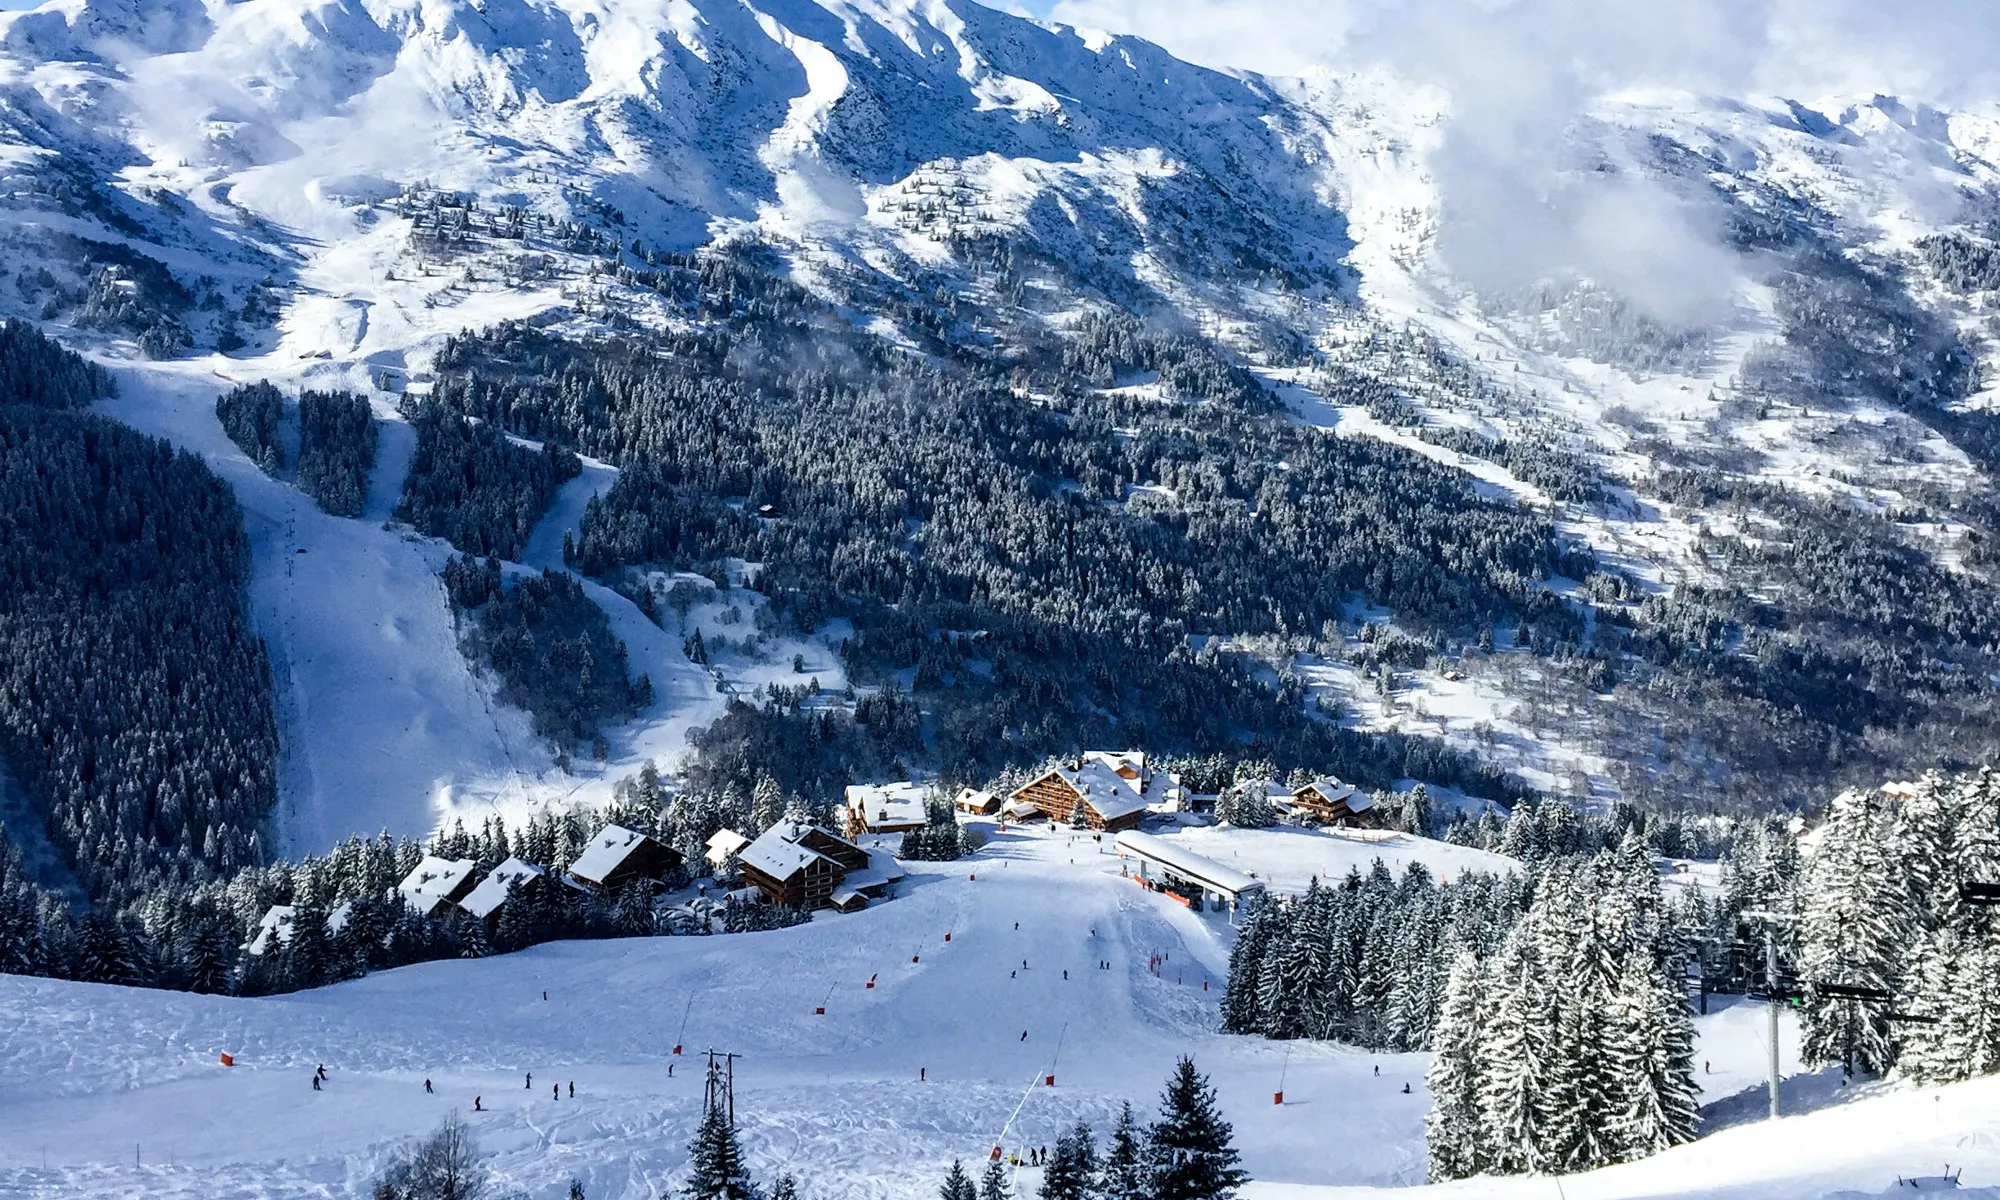 Les Trois Vallees in France, Europe | Snowboarding,Skiing,Snowmobiling - Rated 4.4